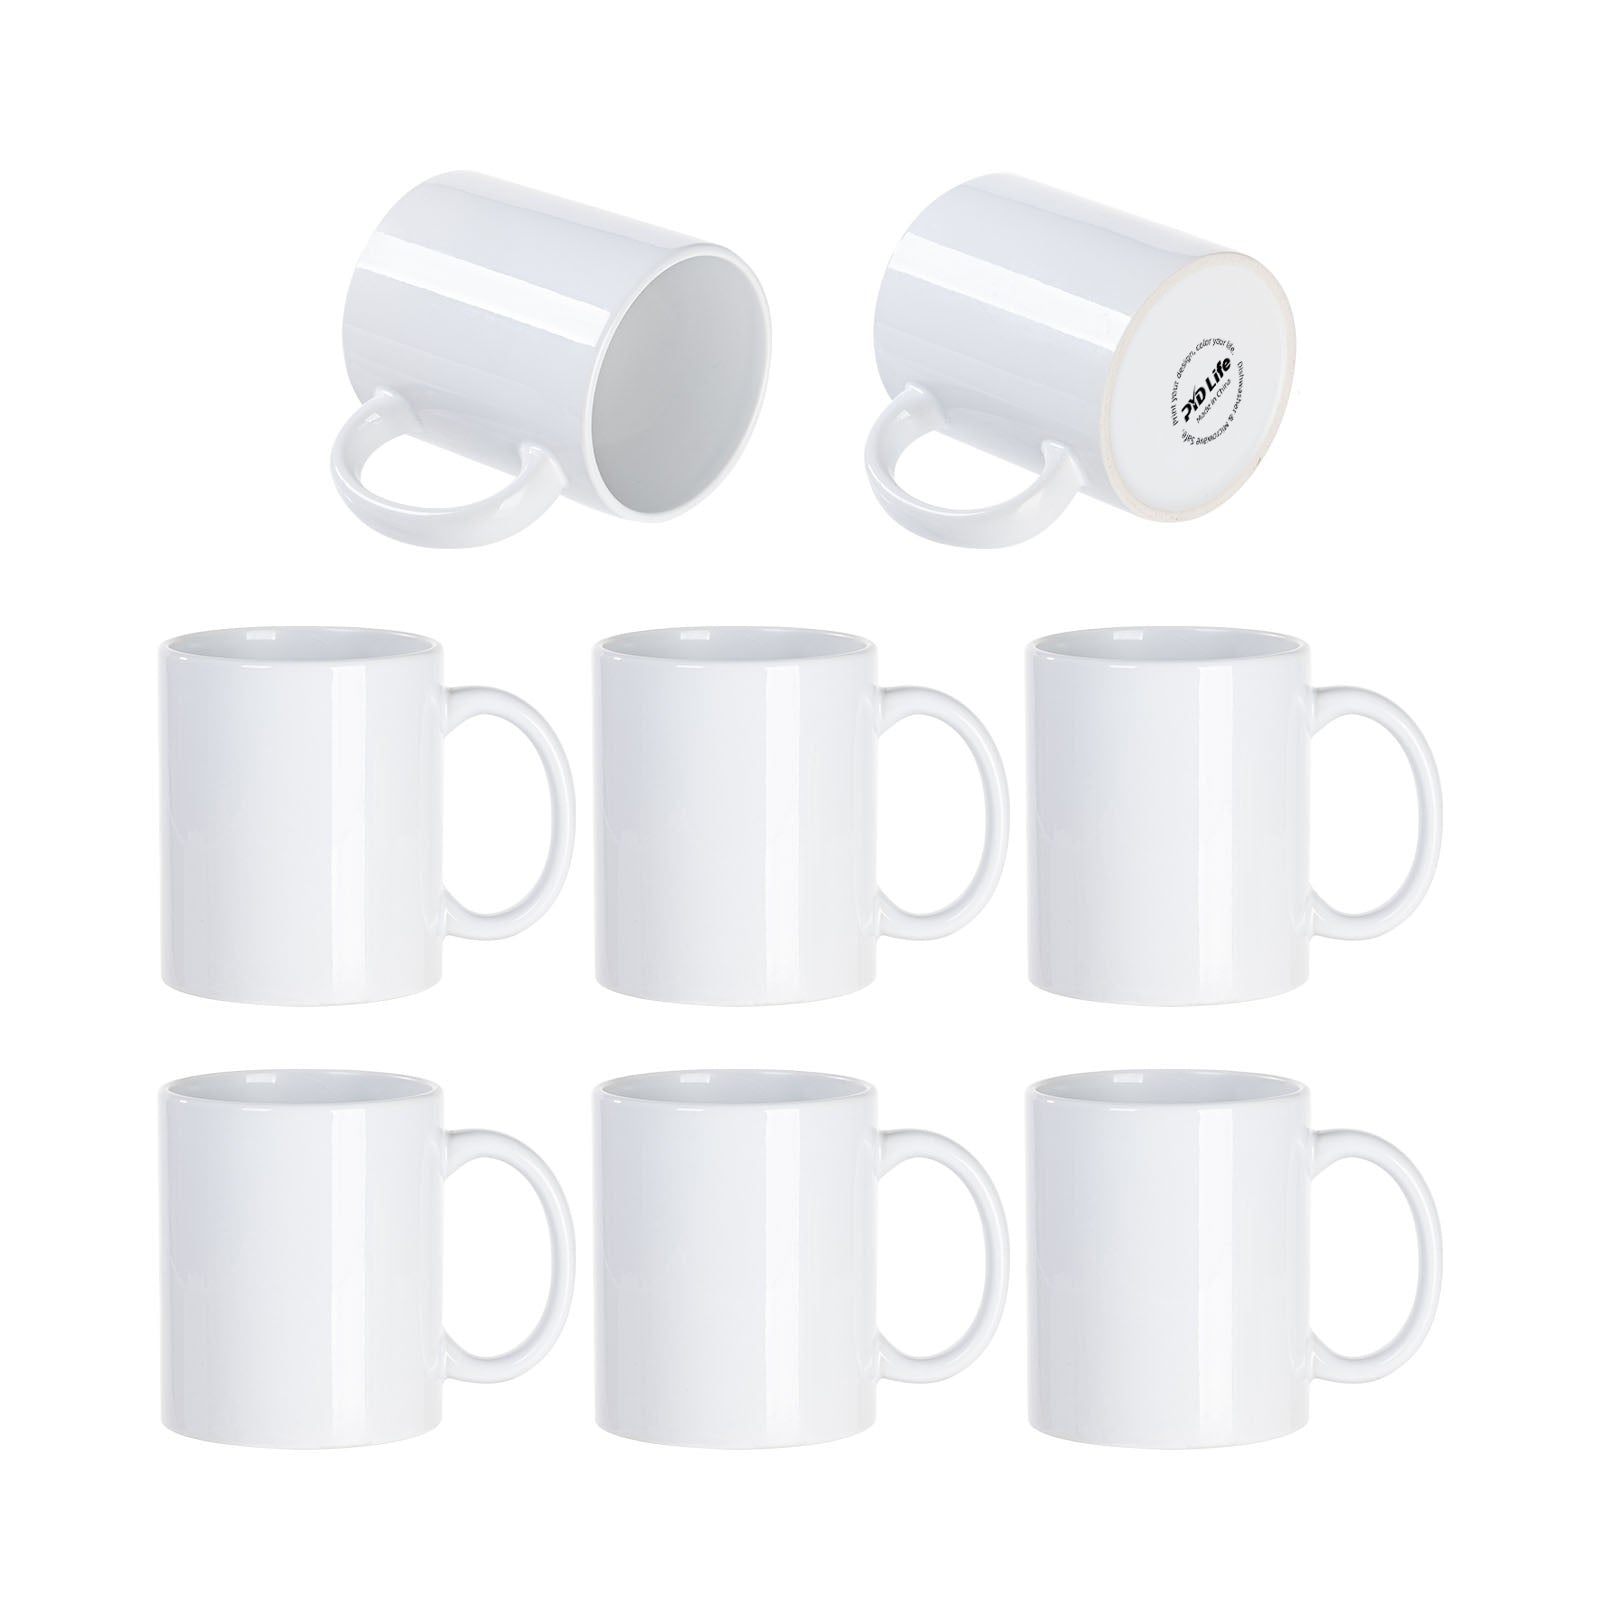  AGH 16pcs 11 Oz Sublimation Mugs Blank, White Coffee Ceramic  Mugs Bulk, 11oz Plain Mug Cups for Sublimation with Stainless Steel Spoon &  Black Ceramic Lid For Coffee, Soup, Tea, Milk